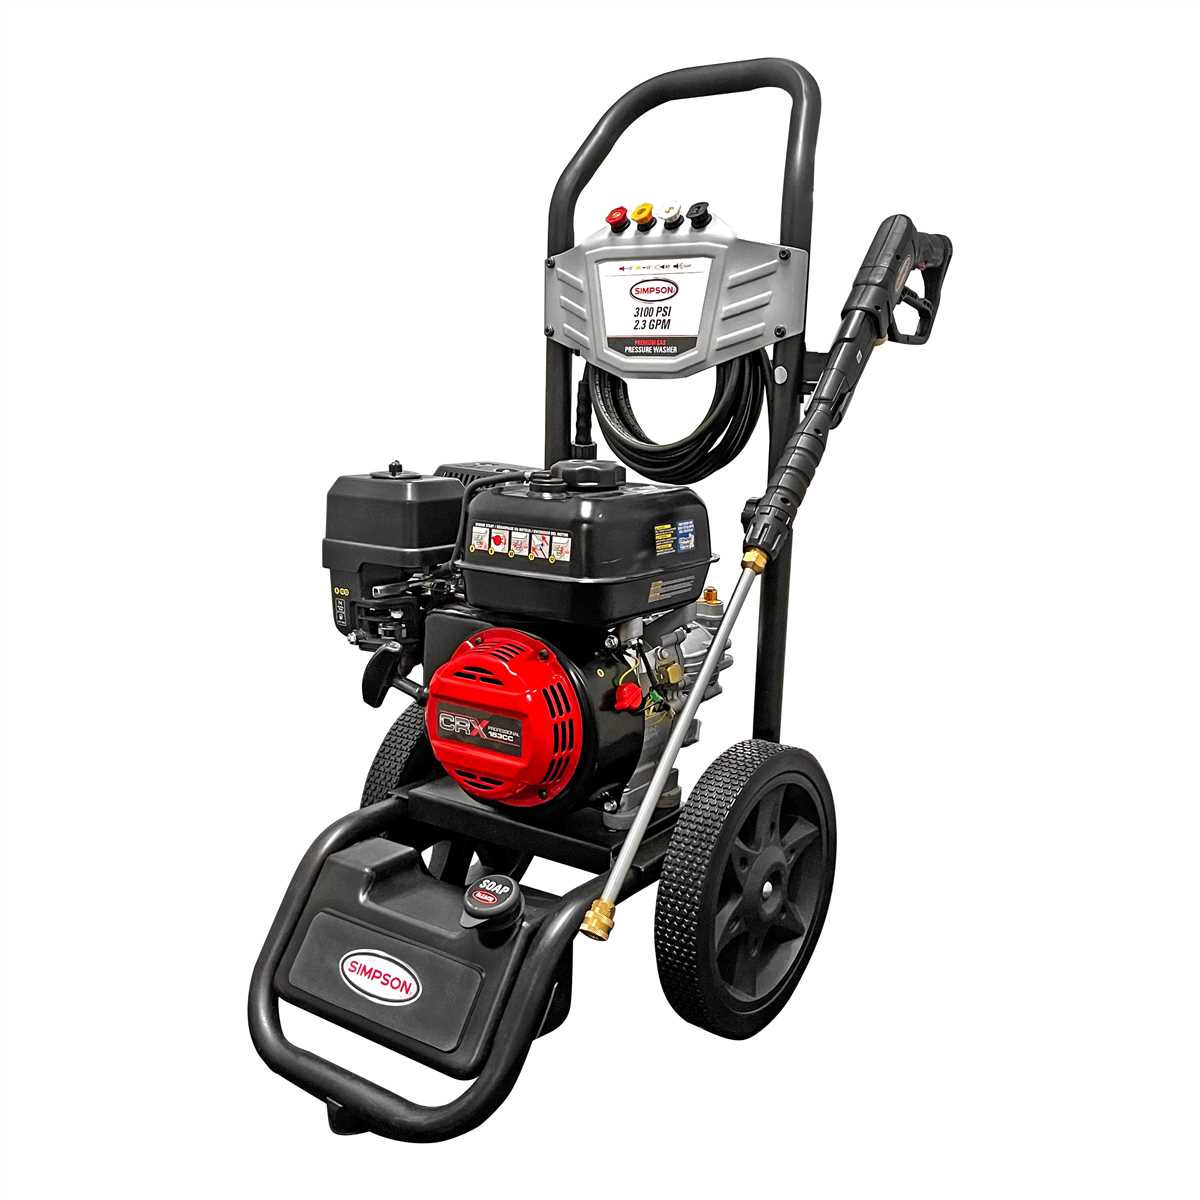 Who manufactures Simpson pressure washer engines?